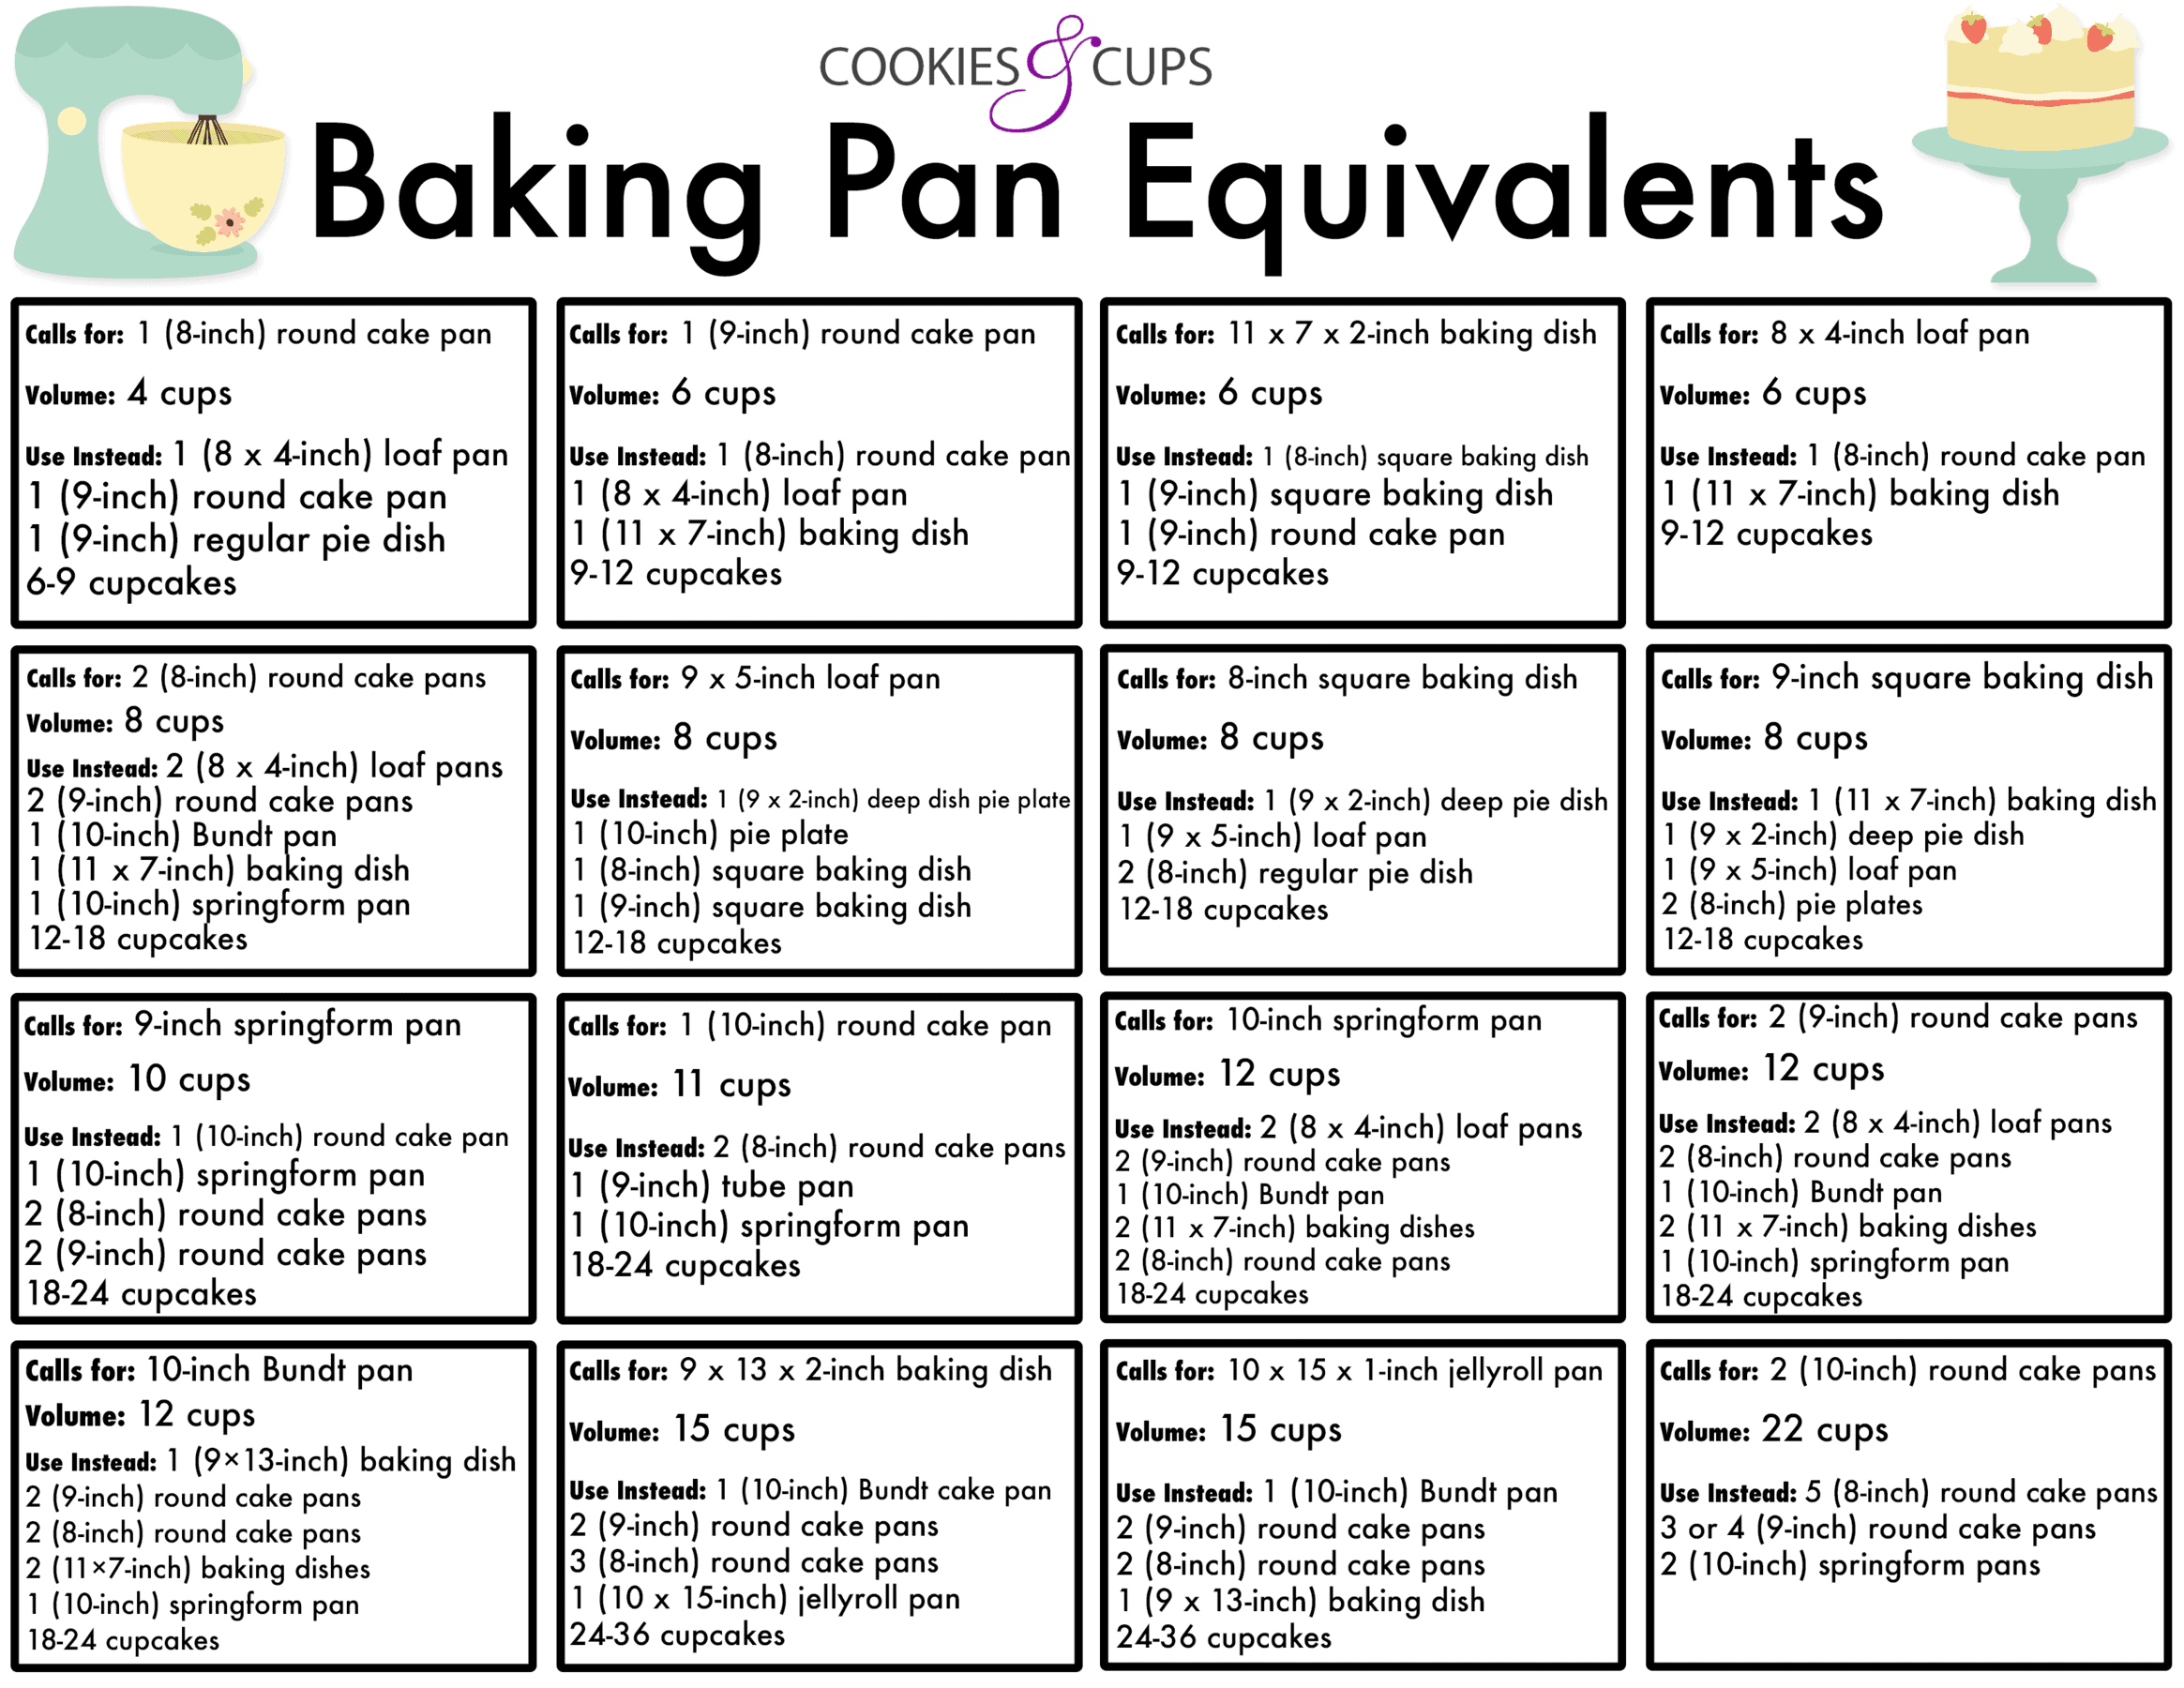 baking-pan-equivalents-cookies-and-cups